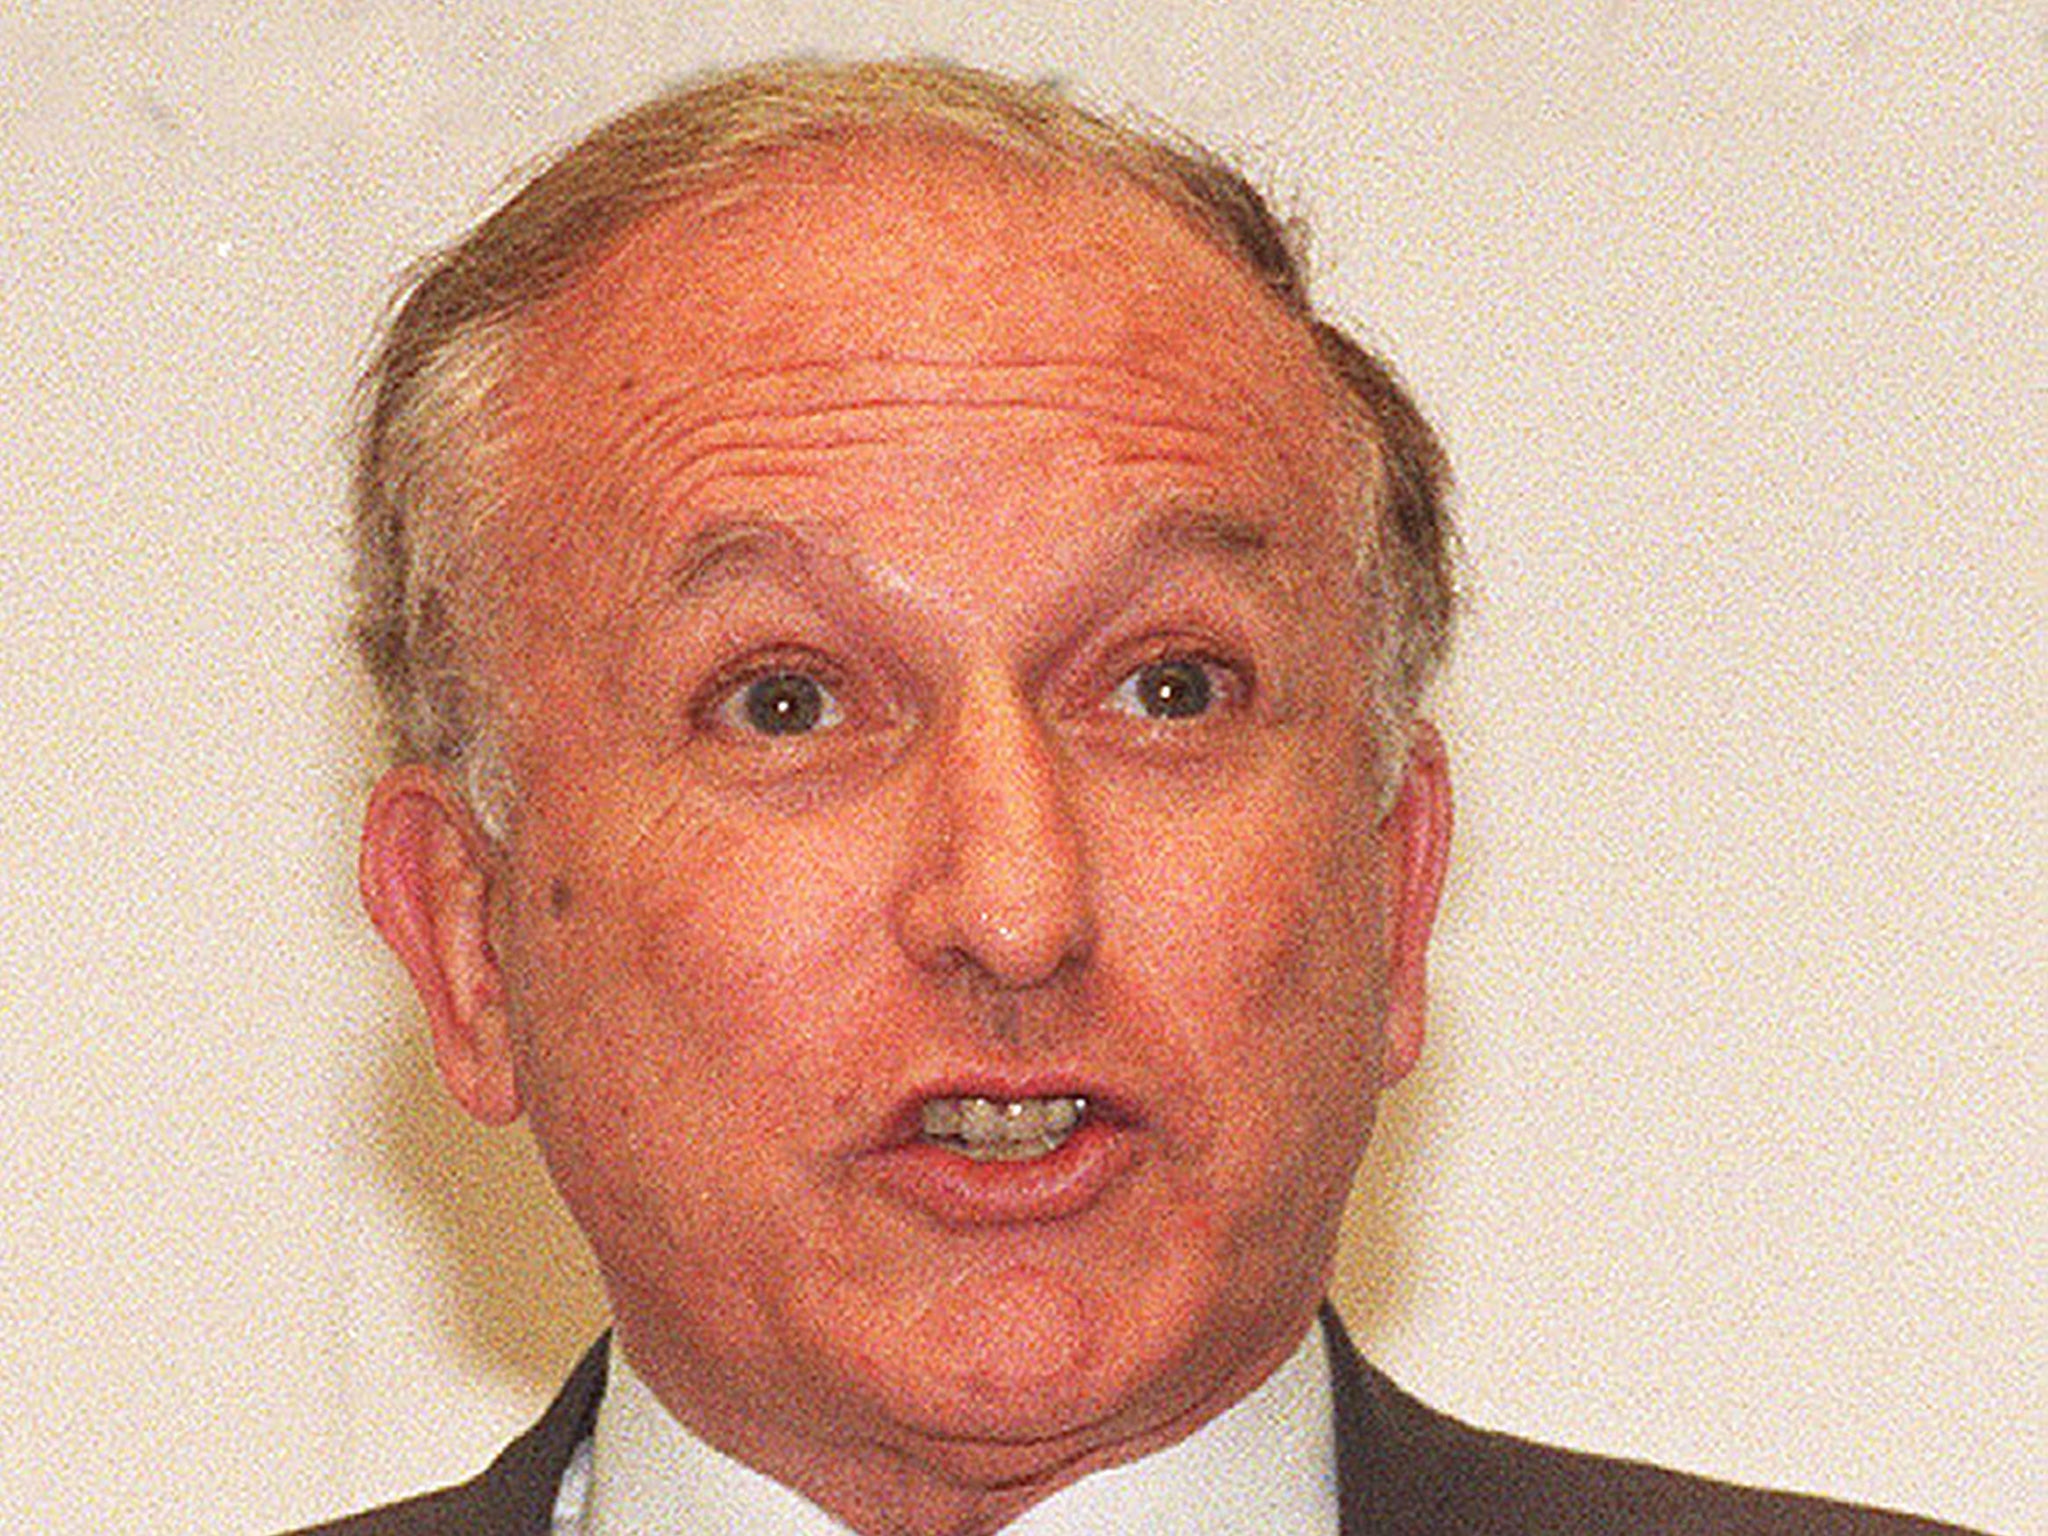 Lord Janner's case will be reviewed